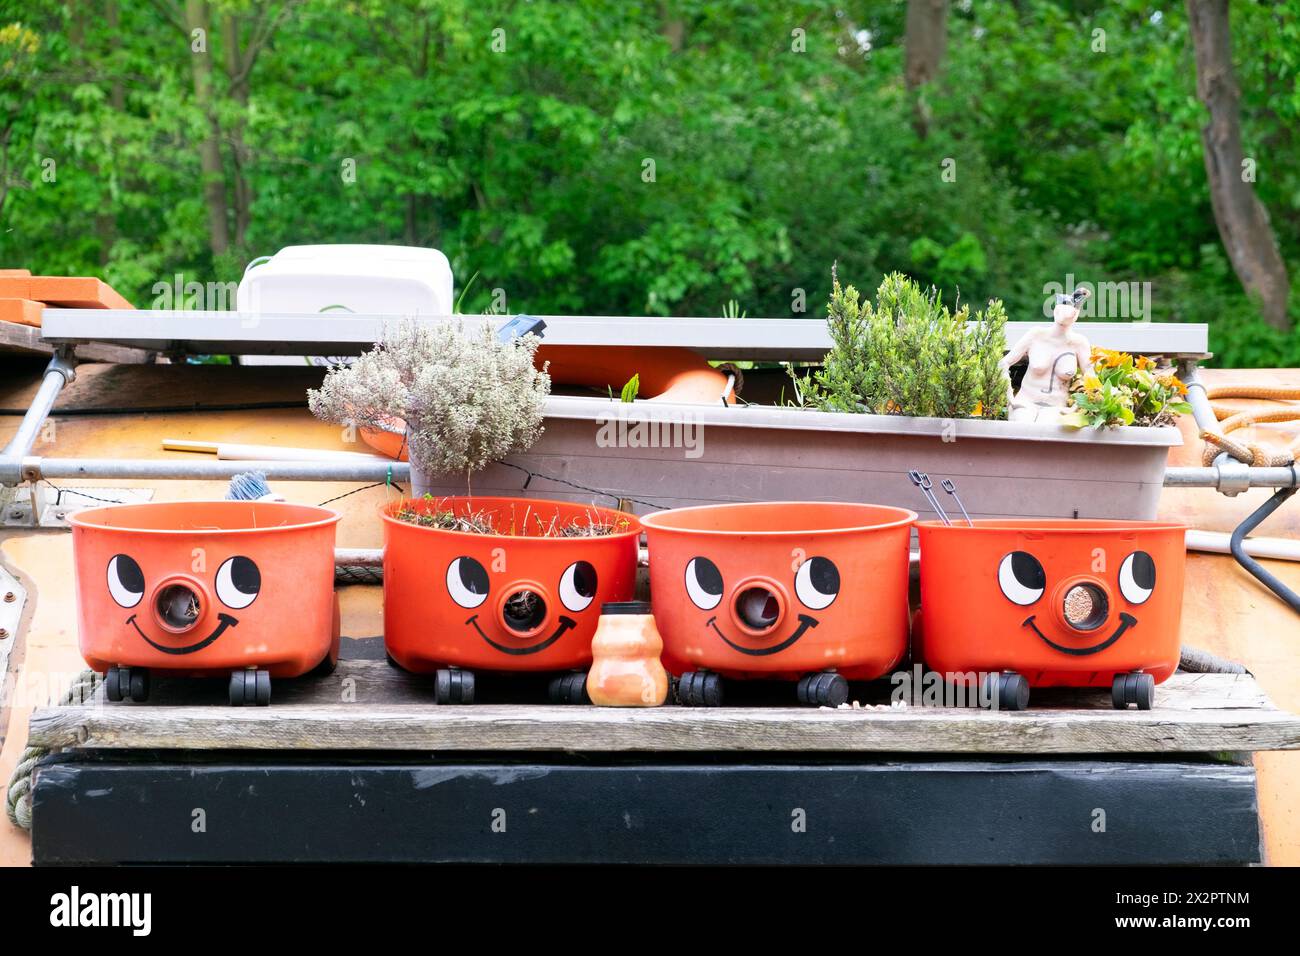 Recycled Henry vacuum cleaner bases reuse as garden pots containers on a canal houseboat roof in Hackney London England UK KATHY DEWITT Stock Photo